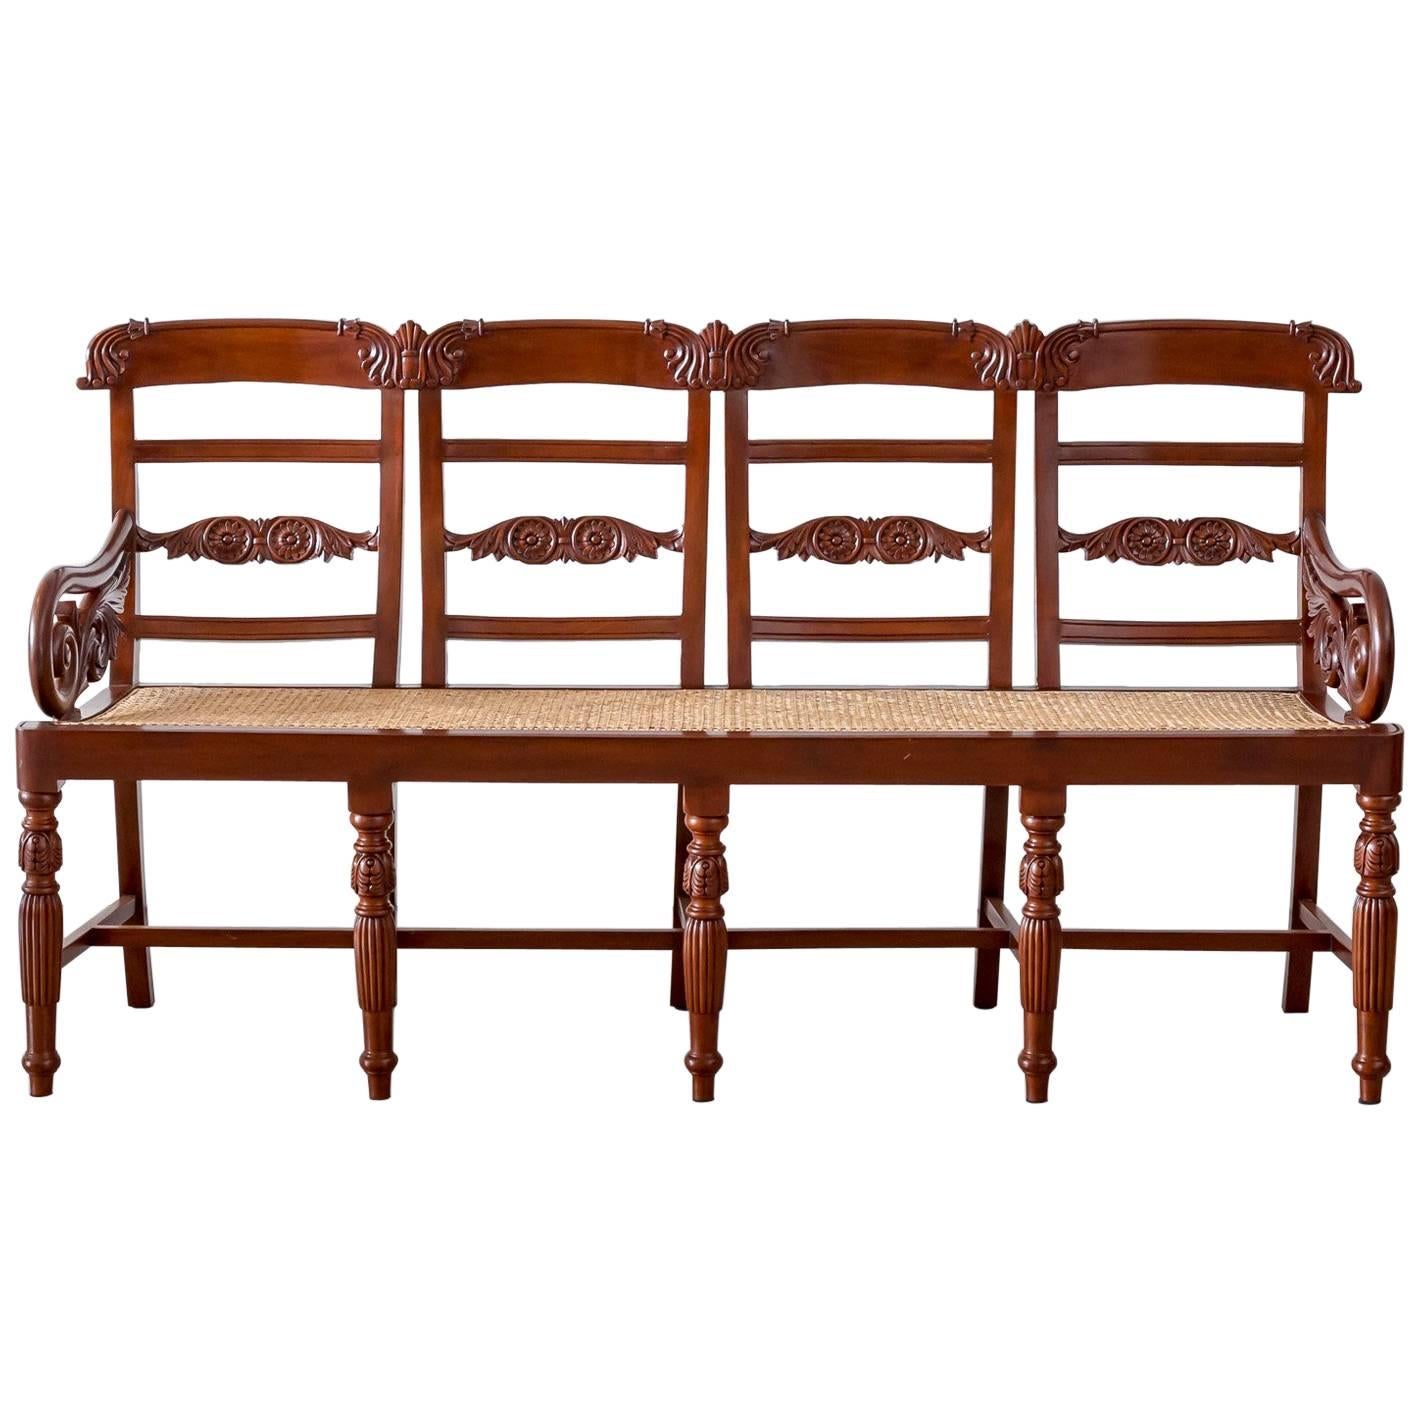 Antique Indo-Portuguese or Portuguese Colonial Mahogany Settee For Sale